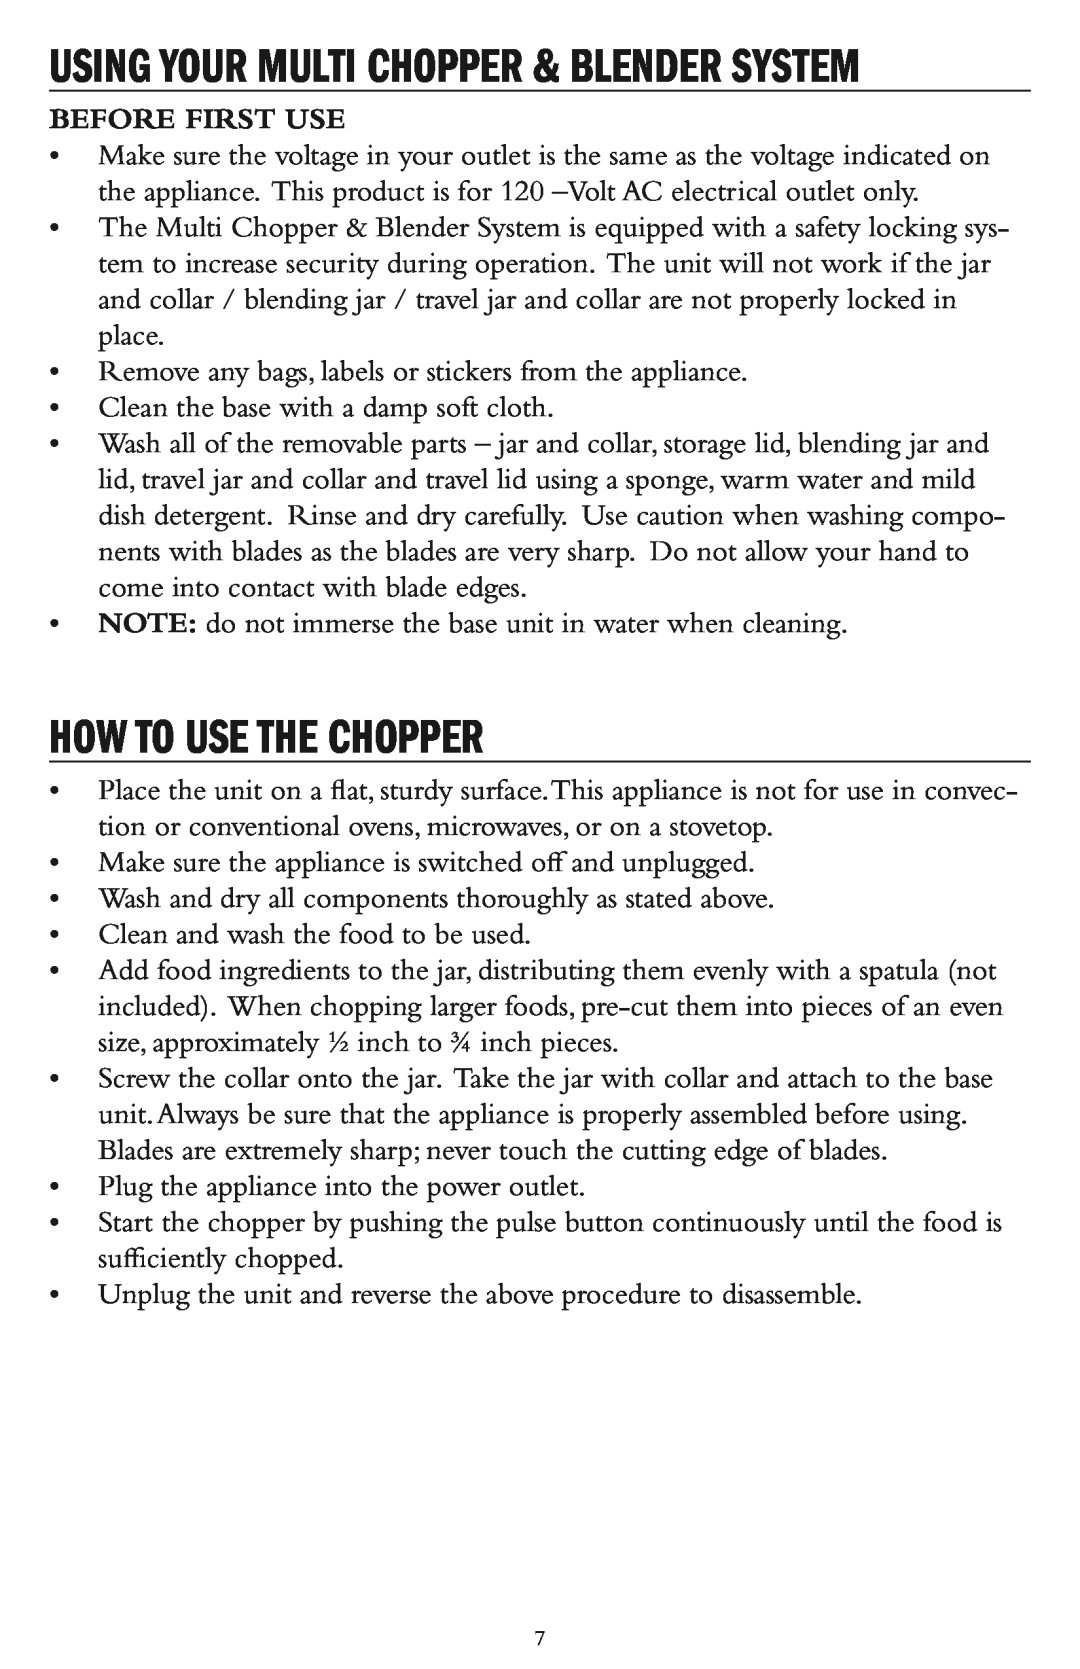 Taylor AB-1002-BL instruction manual How To Use The Chopper, Using Your Multi Chopper & Blender System, Before First Use 